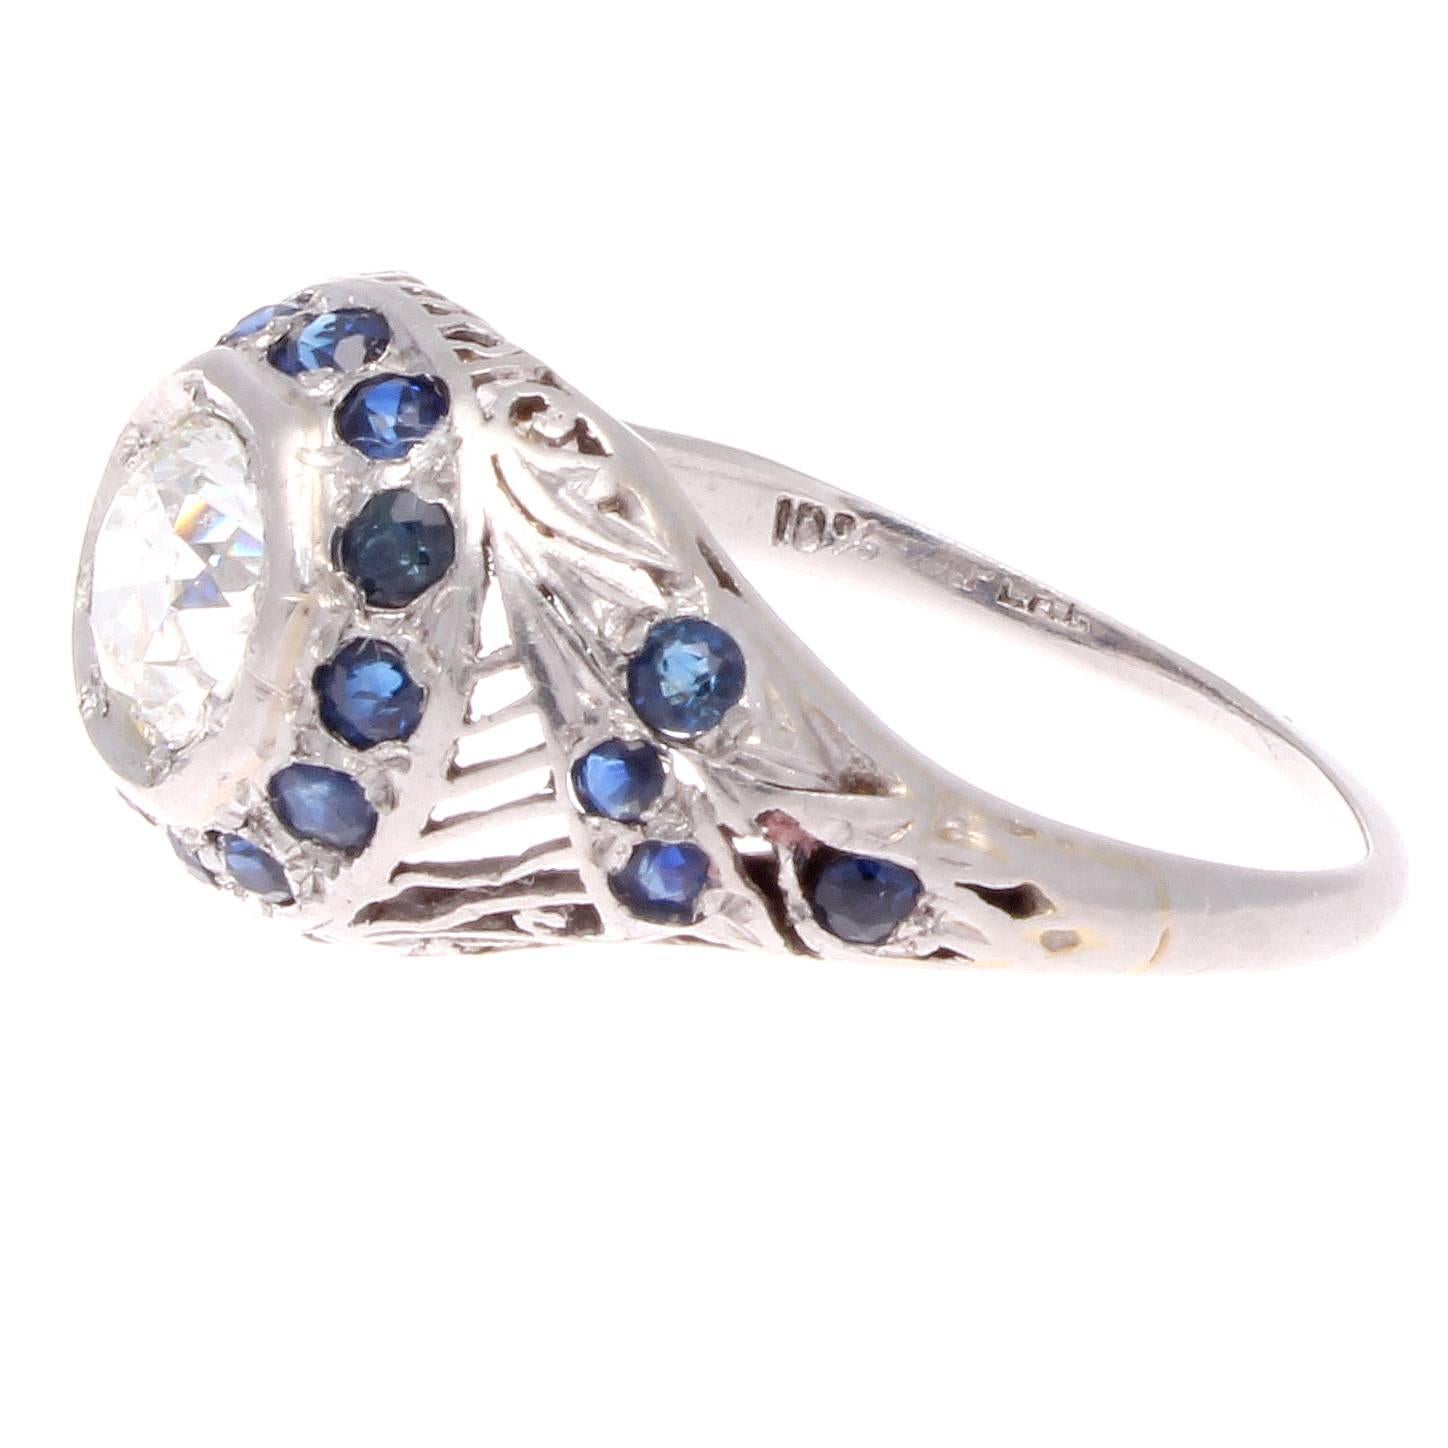 An imaginative art deco design that features iconic style from this era. Designed with a lively center diamond which is surrounded by a halo of deep blue sapphires. Accented with stylish geometric carved filagree lines and more well matching deep